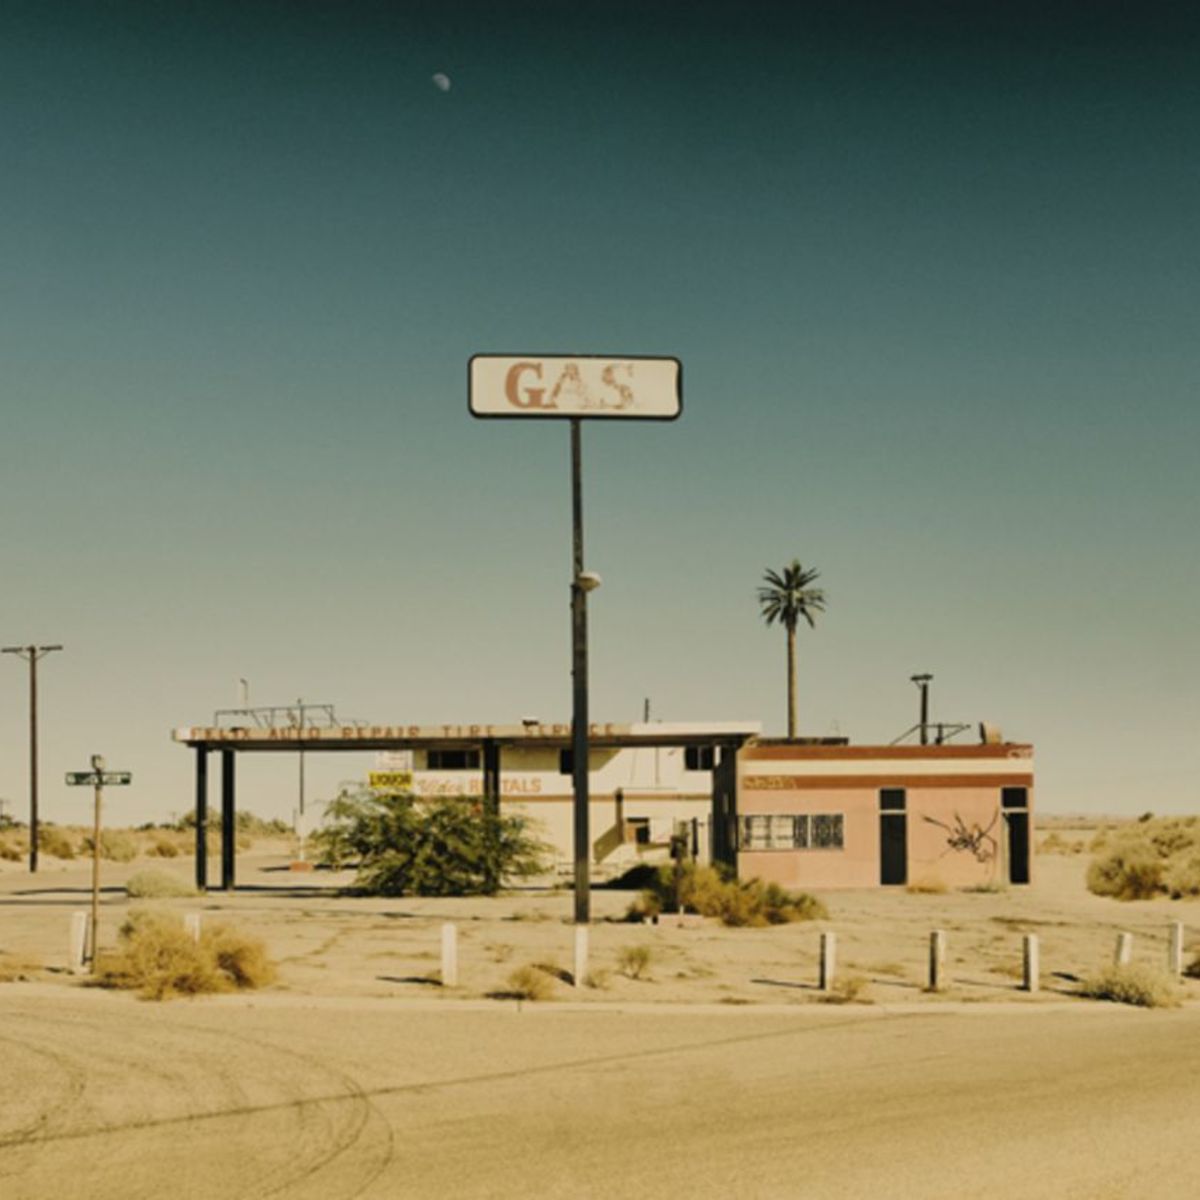 A gas station in the middle of nowhere - California